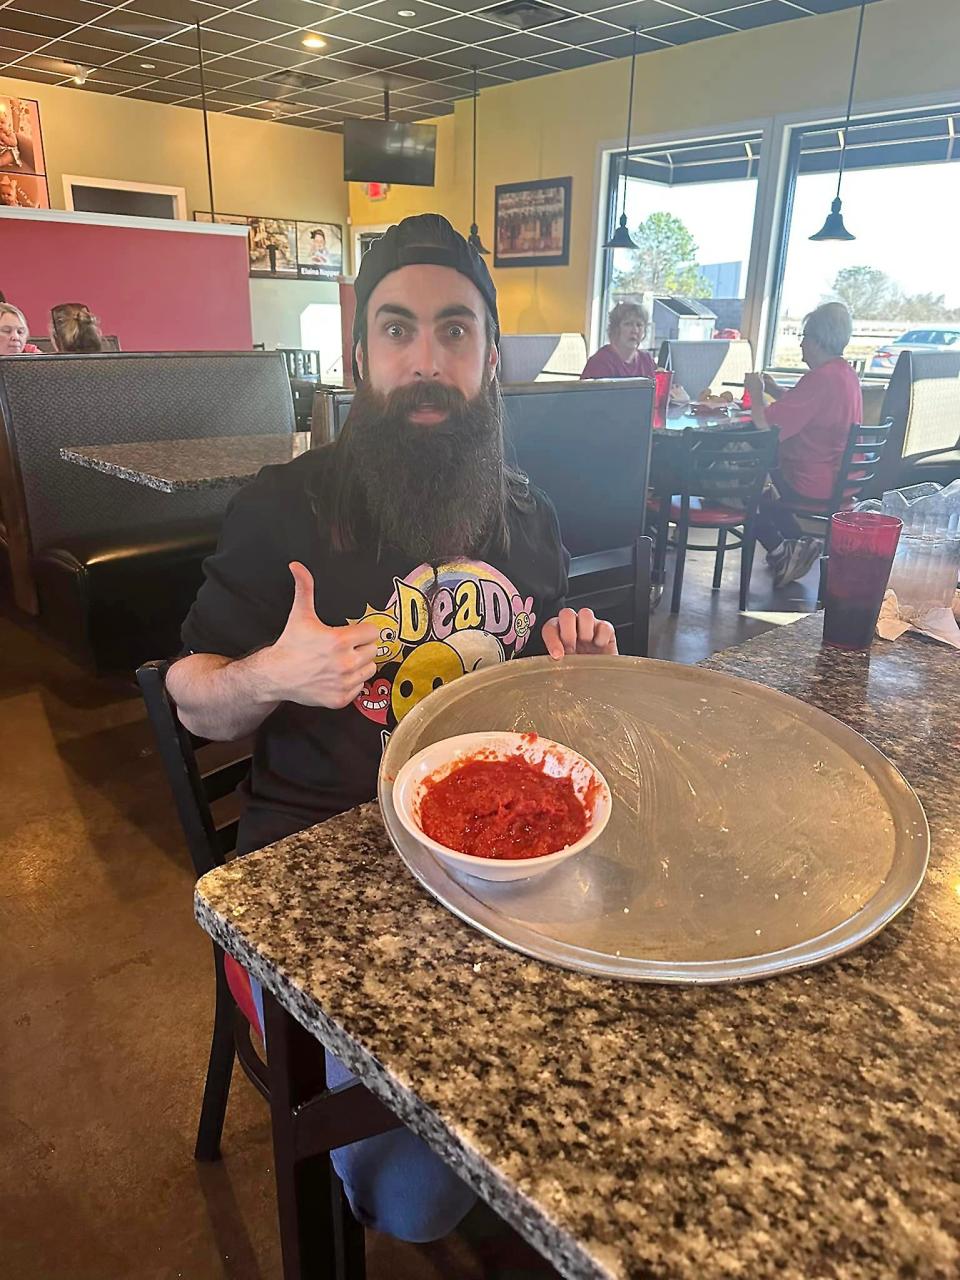 Competitive eater and YouTube star Adam Moran from England is pictured Jan. 4 after successfuly completing the calzone challenge at Tre Ragazzi's Glencoe location. It involves eating the restaurant's super-sized calzone with at least three toppings, including two meats, within an hour. 